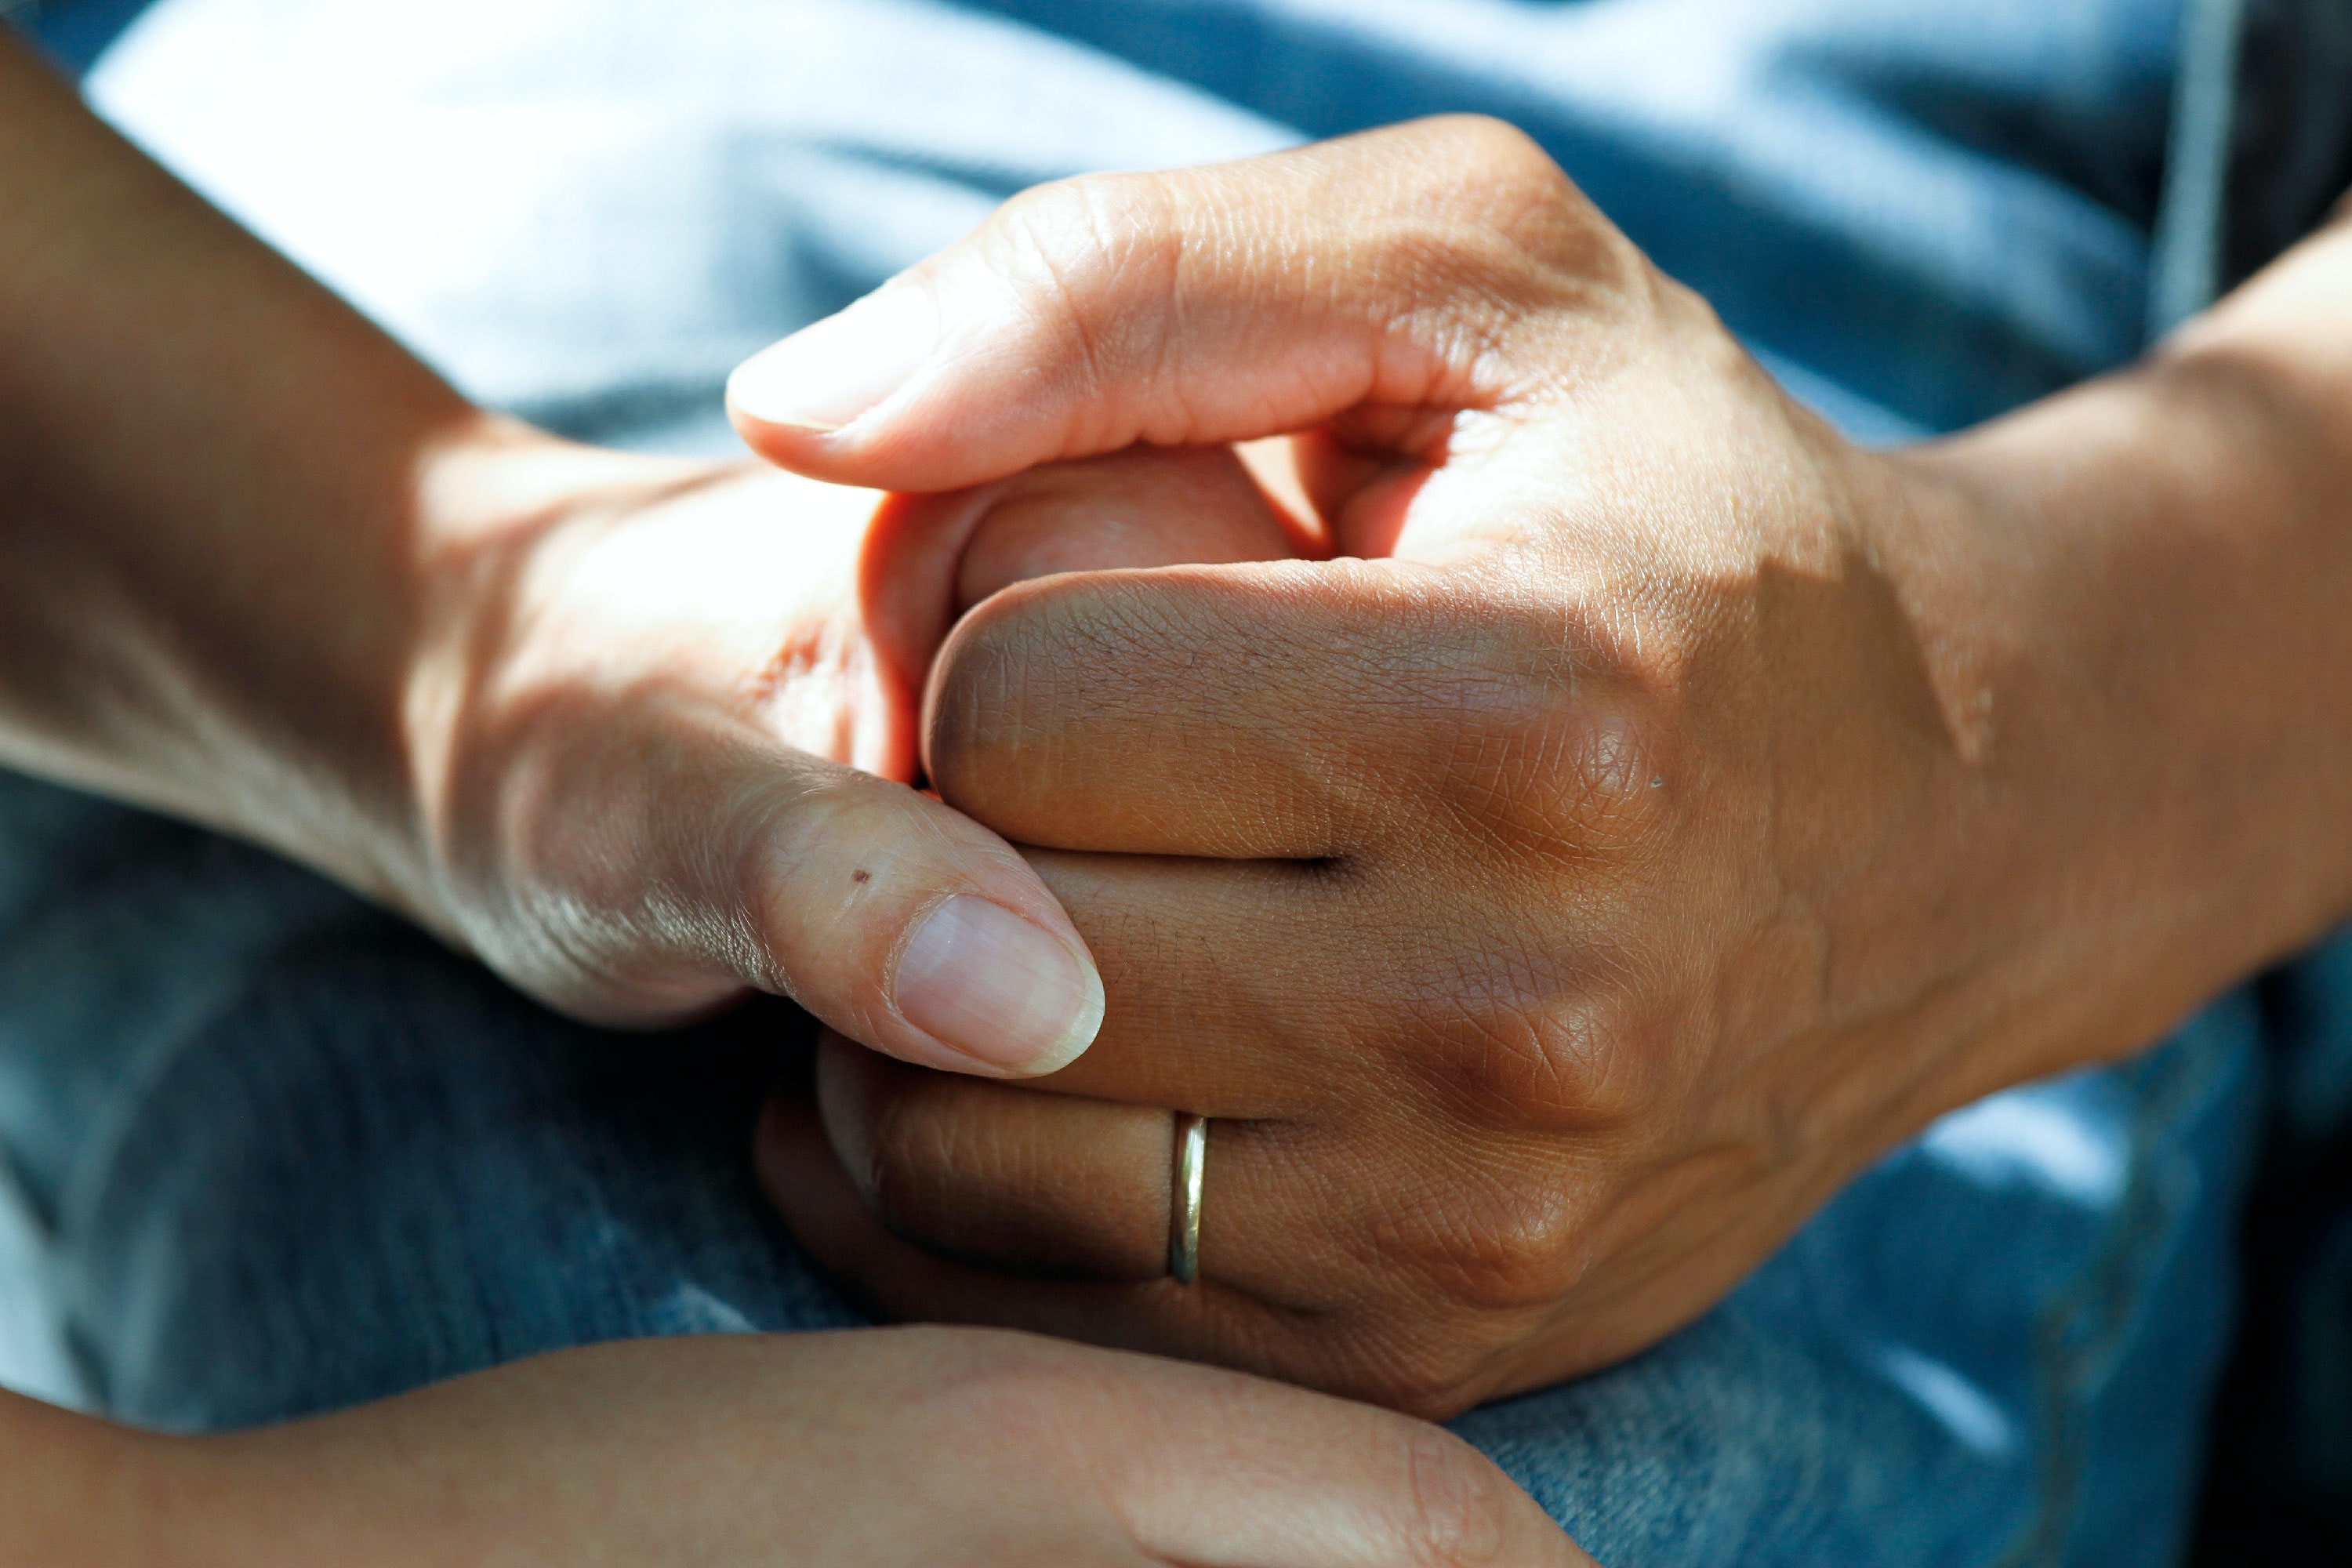 Close up of two people's hands holding each other in a comforting manner